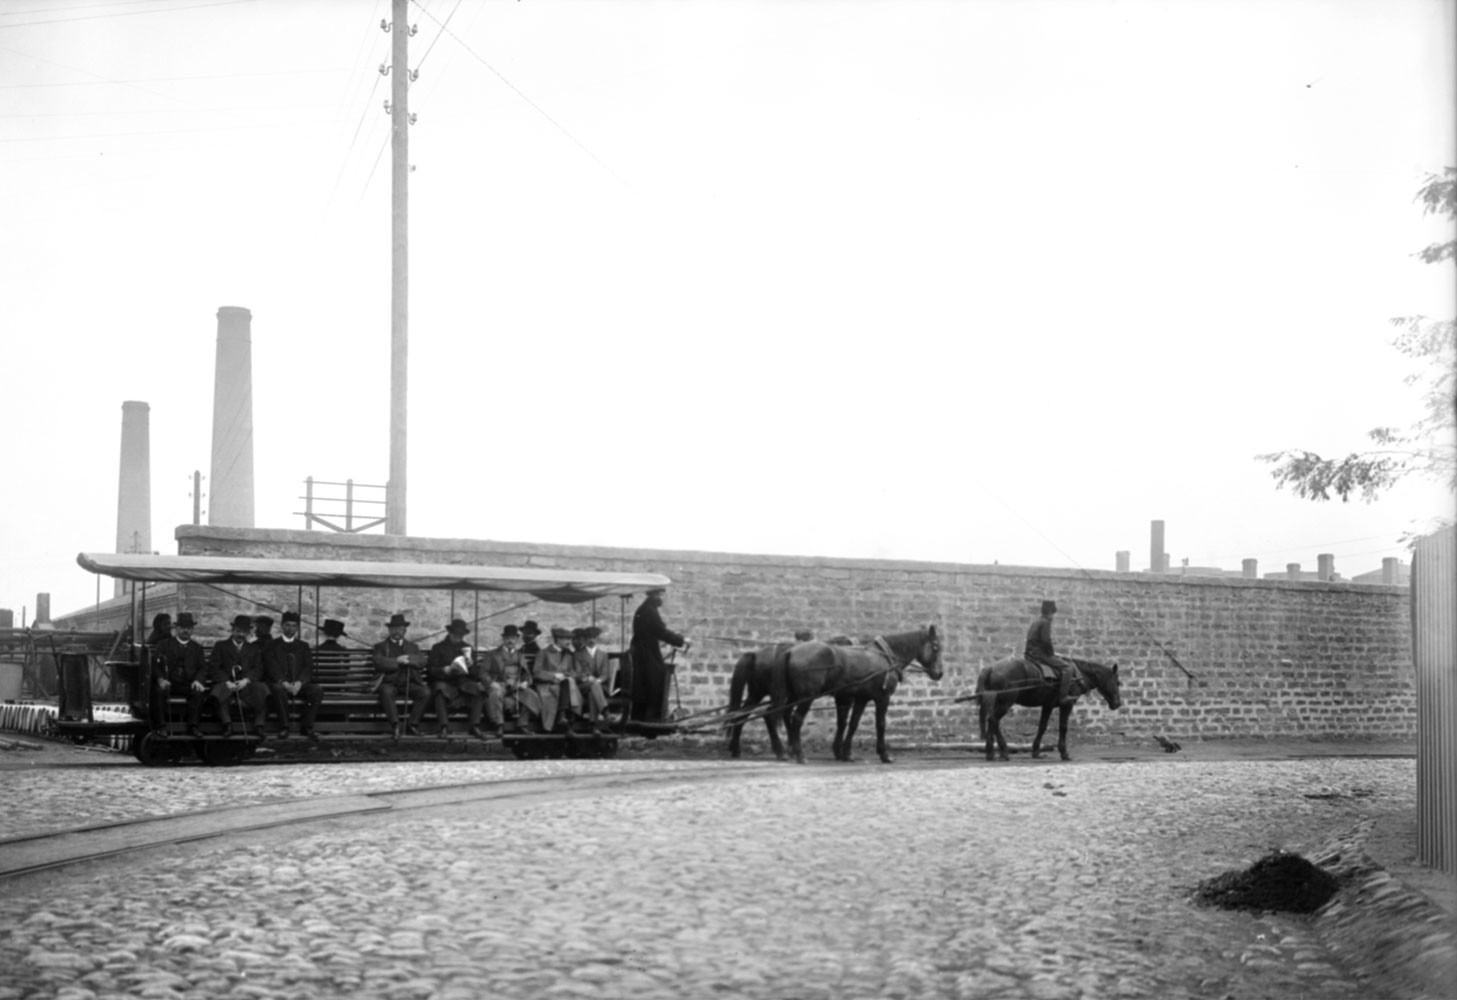 The intensive growth of the city, development of oil fields, construction of new plants demanded a quick solution to the transport problems. Some claim that horse-drawn cars and trams were all to be found in Baku.